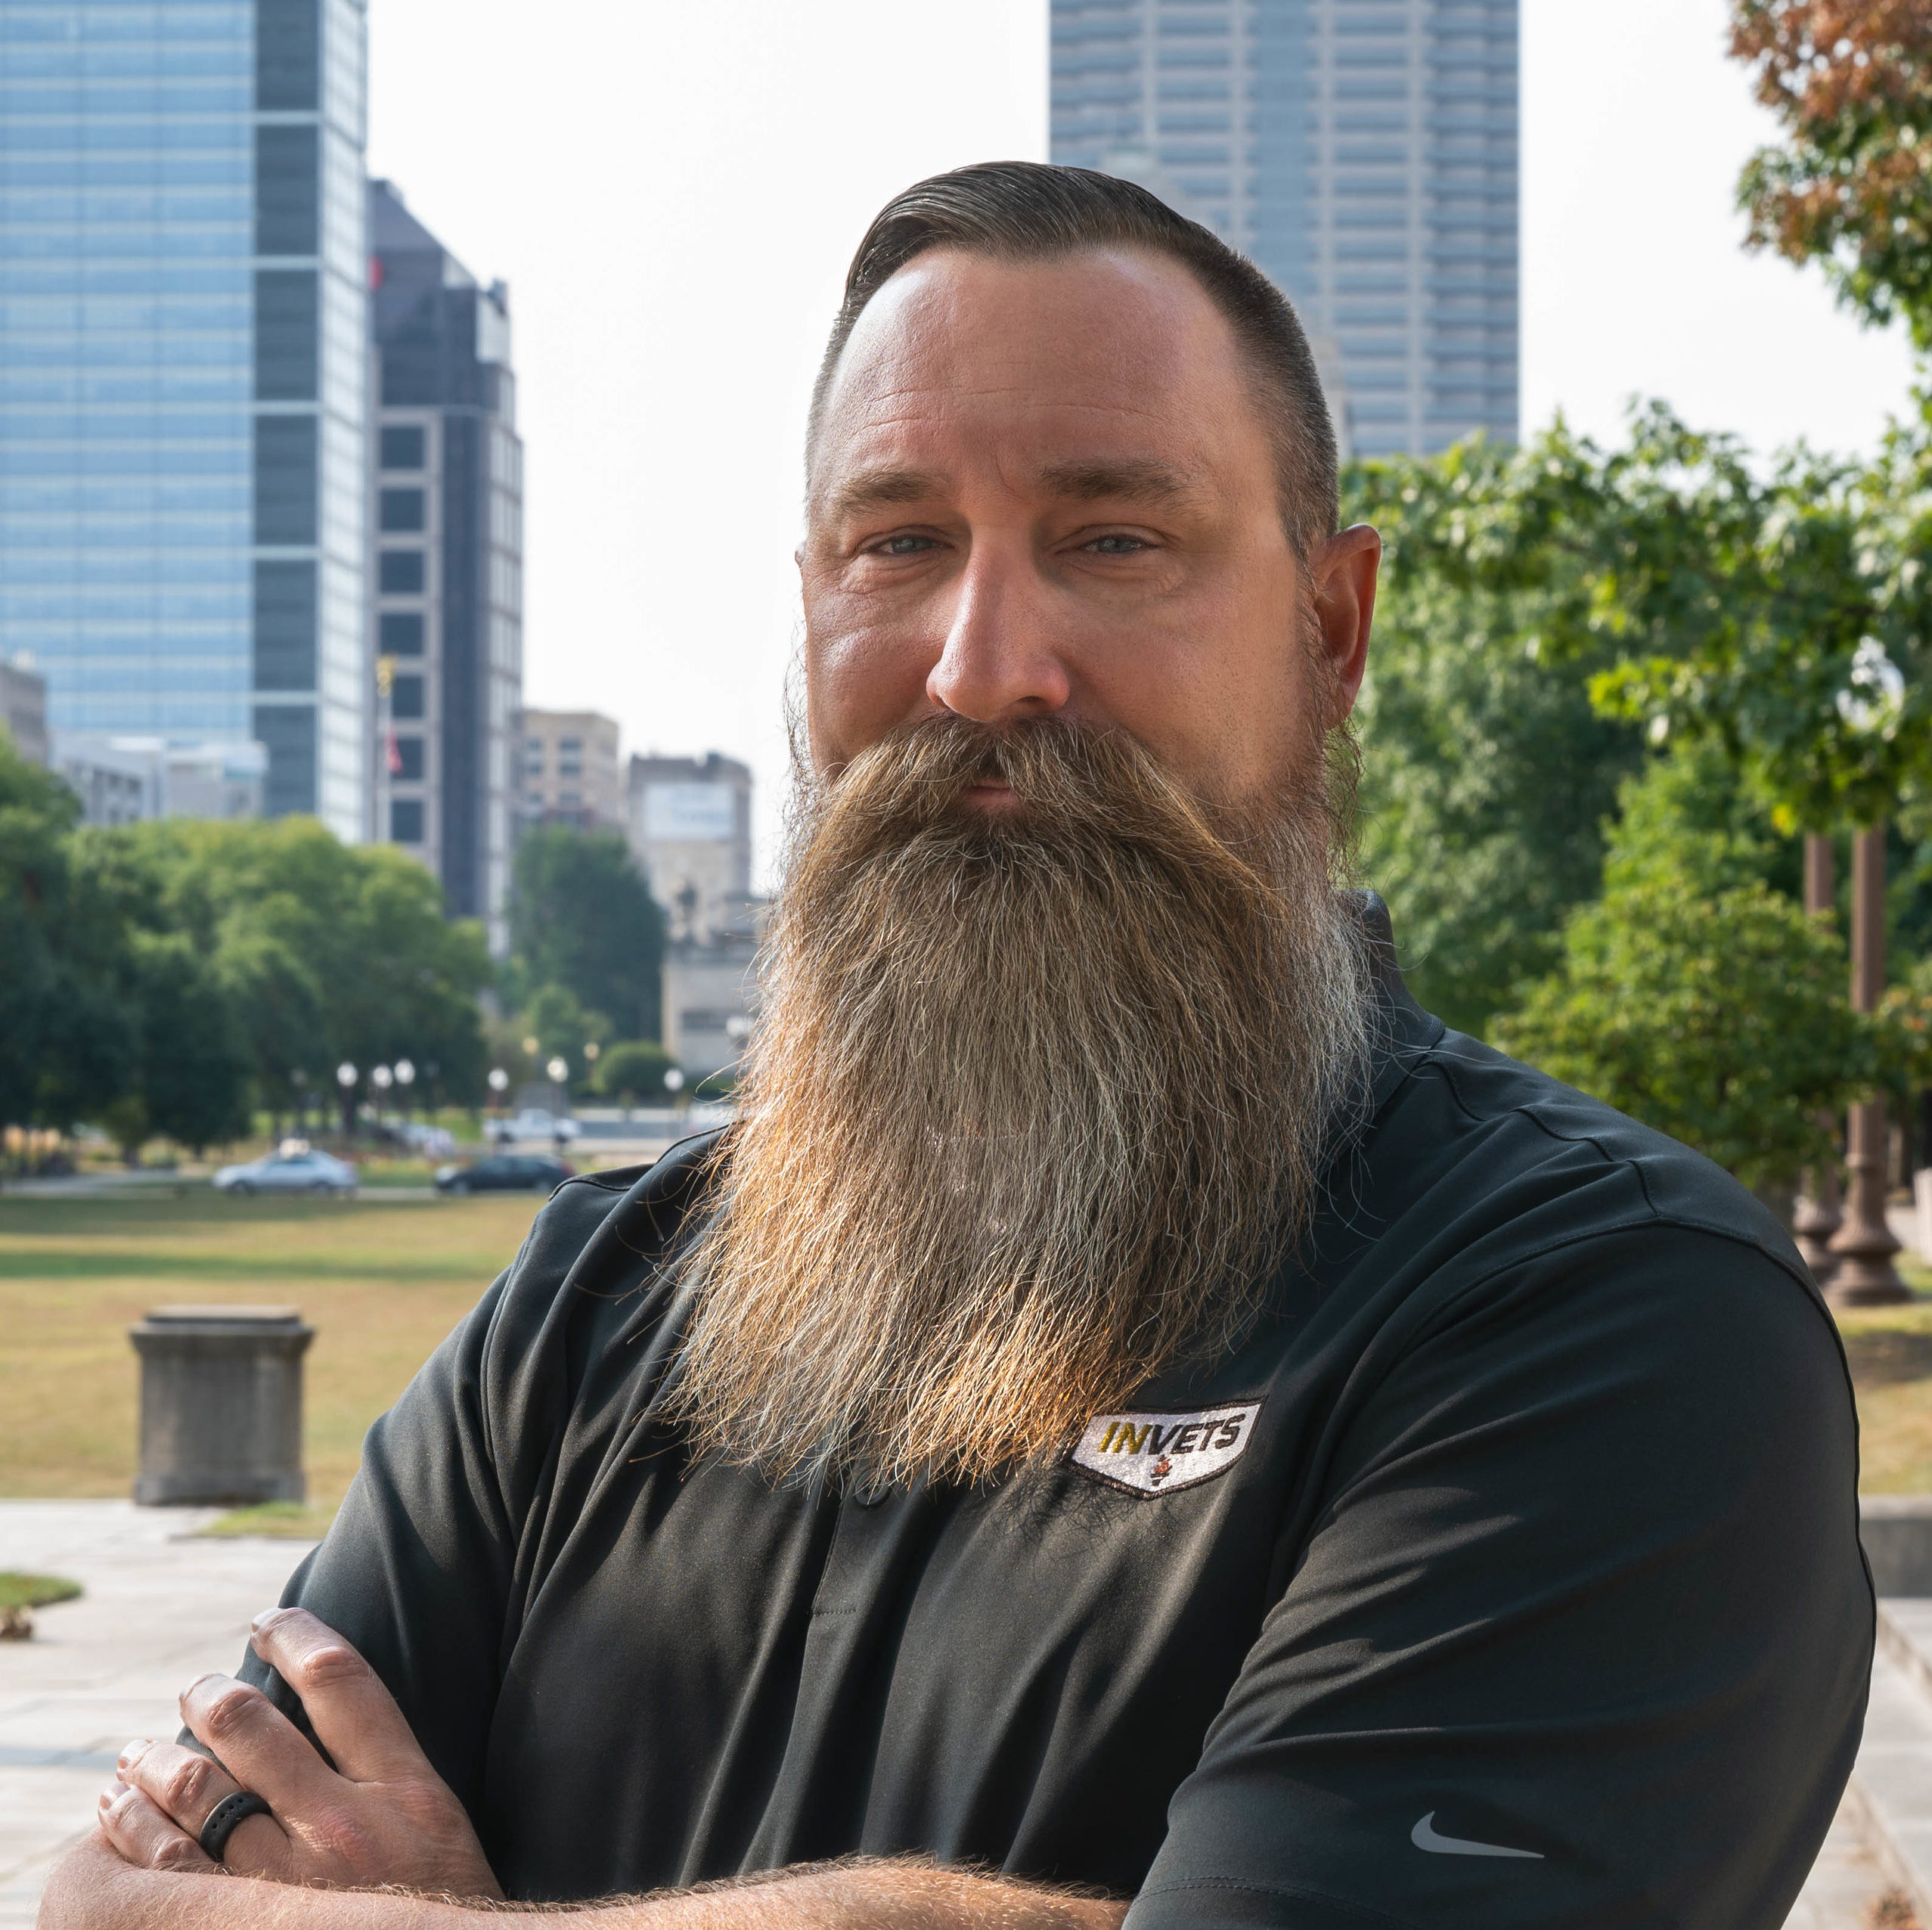 Jerry Young, Infantry, Army, Air Force, Veteran, Combat, National Guard, Indiana, Freedom Beard, Veteran Engagement Manager, LinkedIn.